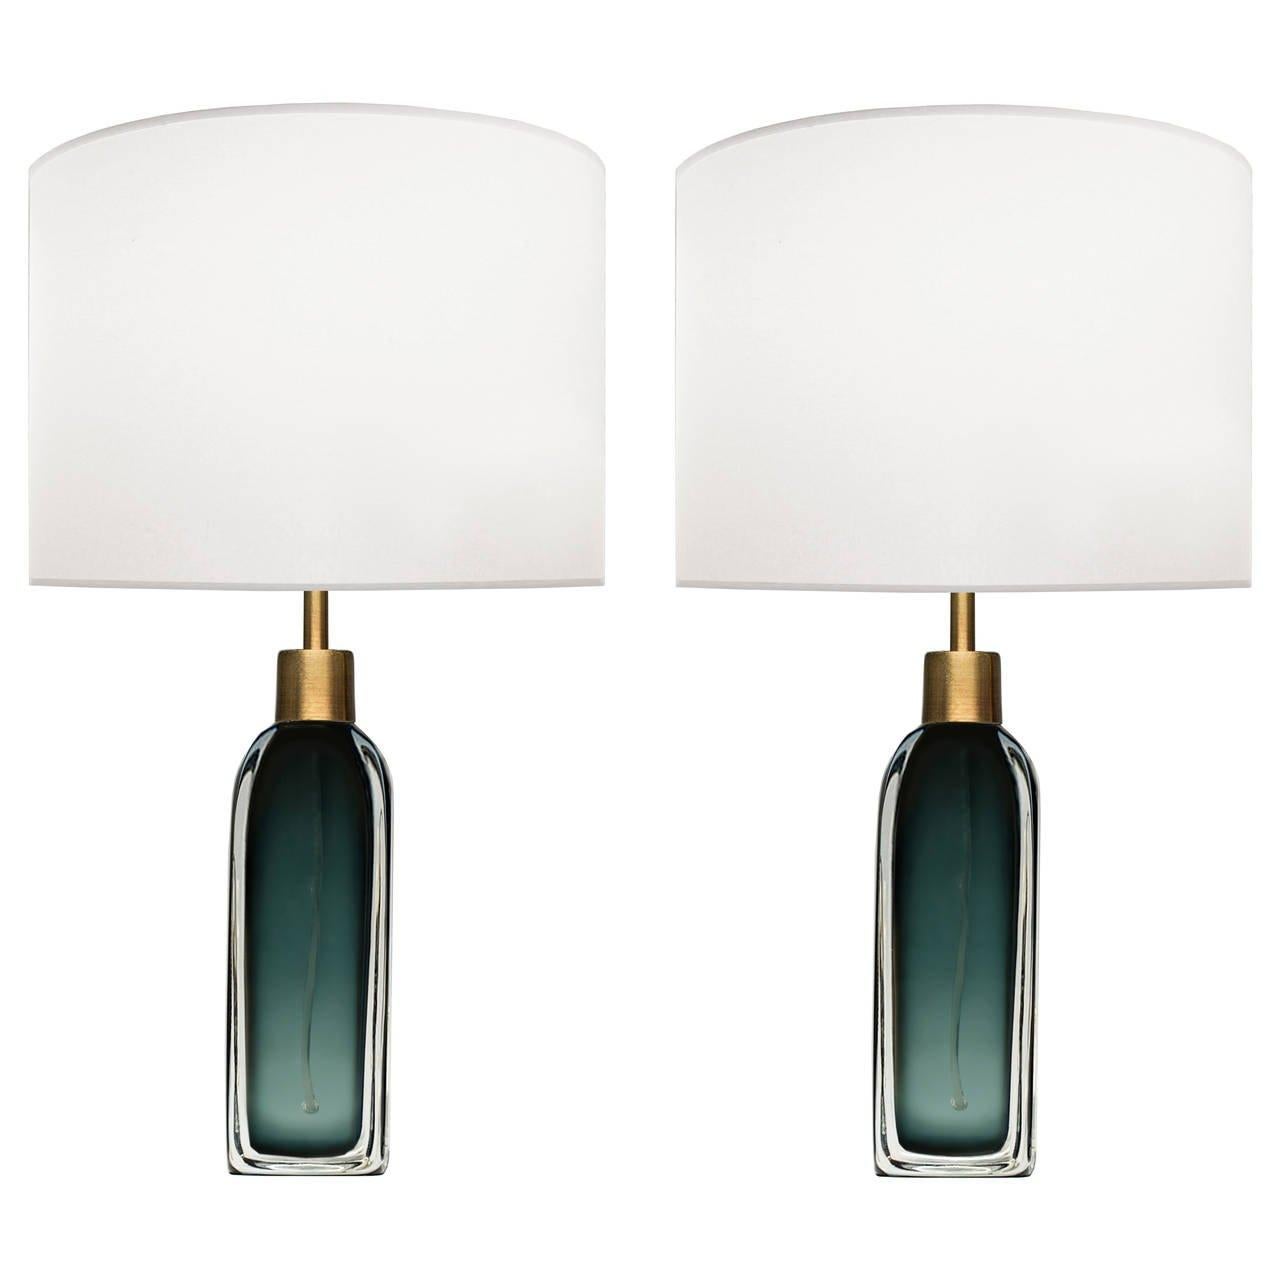 A pair of green glass lamps with thick clear glass casing and brass hardware by Nils Landberg for Orrefors.

Swedish, Circa 1950's

Lamp Shades Are Not Included.

If you are interested in Lamp Shades, please email The Craig Van Den Brulle Design